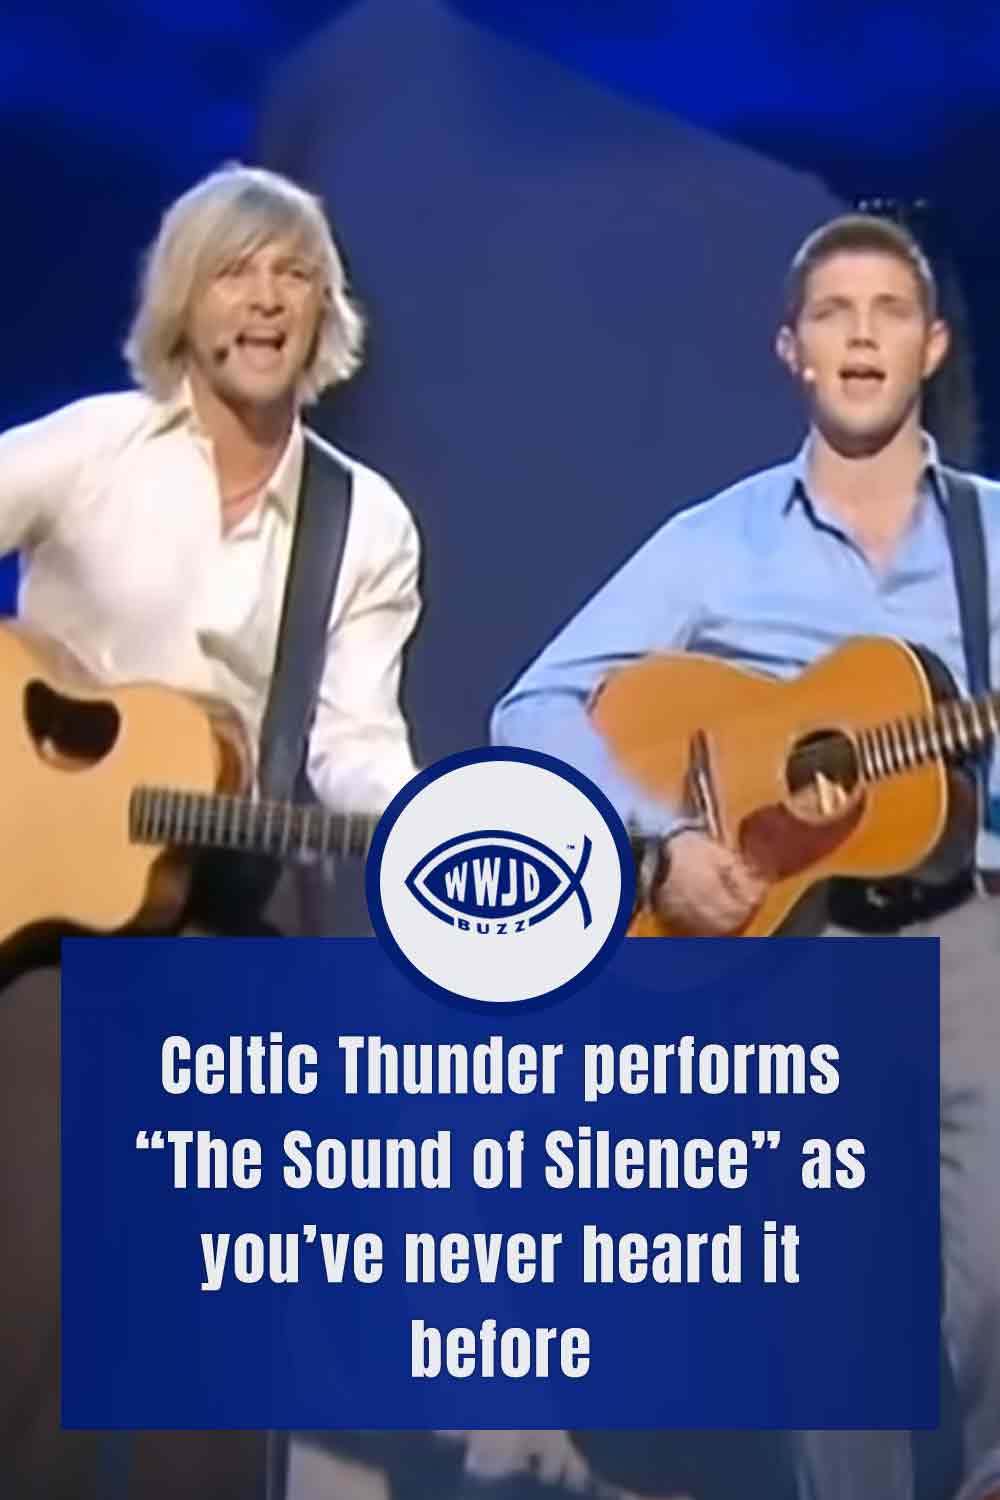 Celtic Thunder performs “The Sound of Silence” as you’ve never heard it before